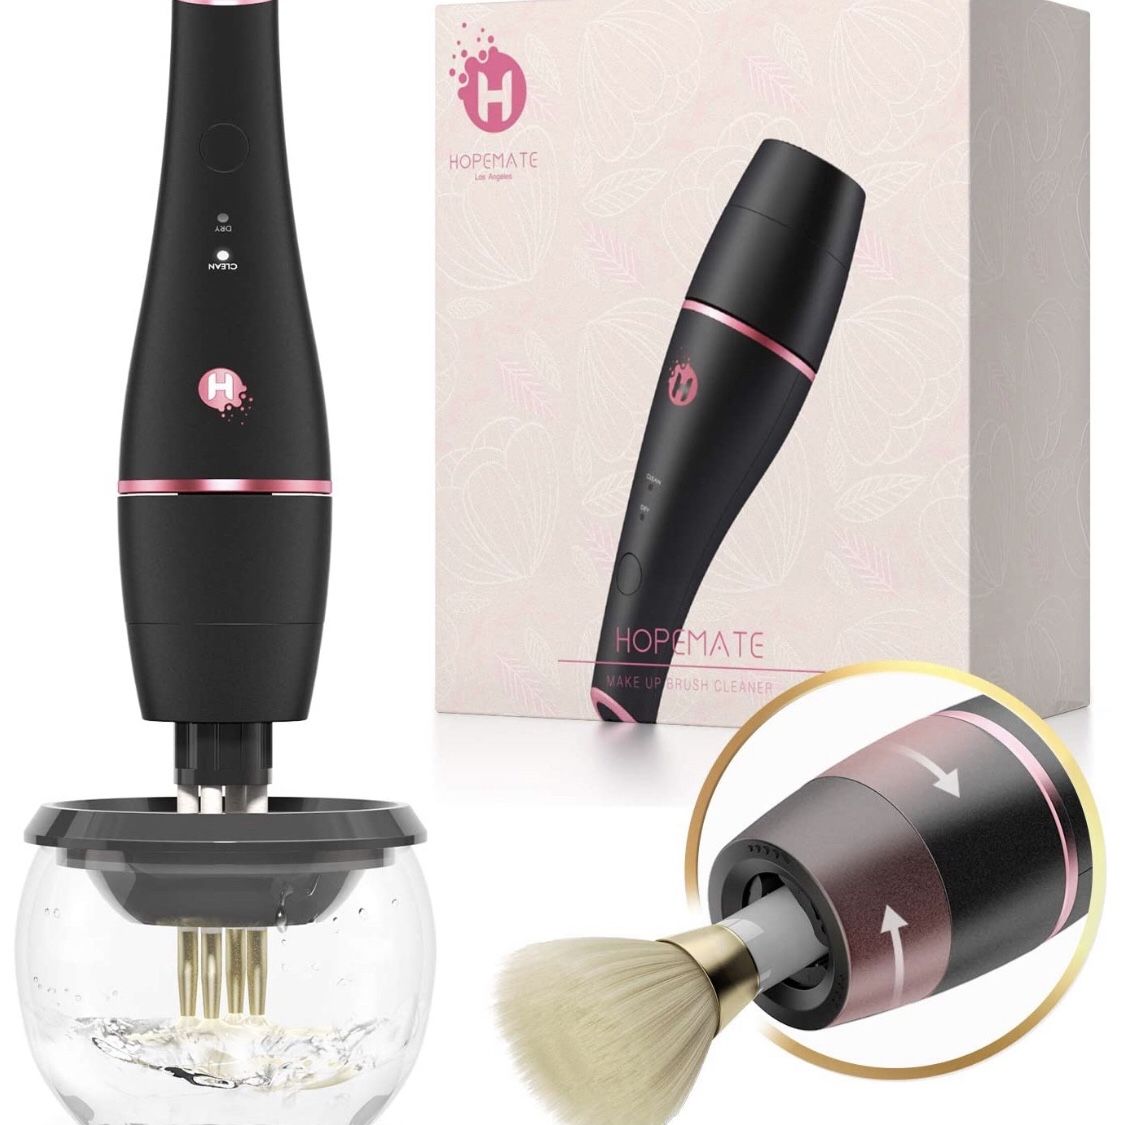 All in 1 Makeup Brush Cleaner, HOPEMATE Electric Makeup Brush Spinner Dryer Cleaning Machine, Cleanse Cosmetics, Dusts of Makeup Brushes